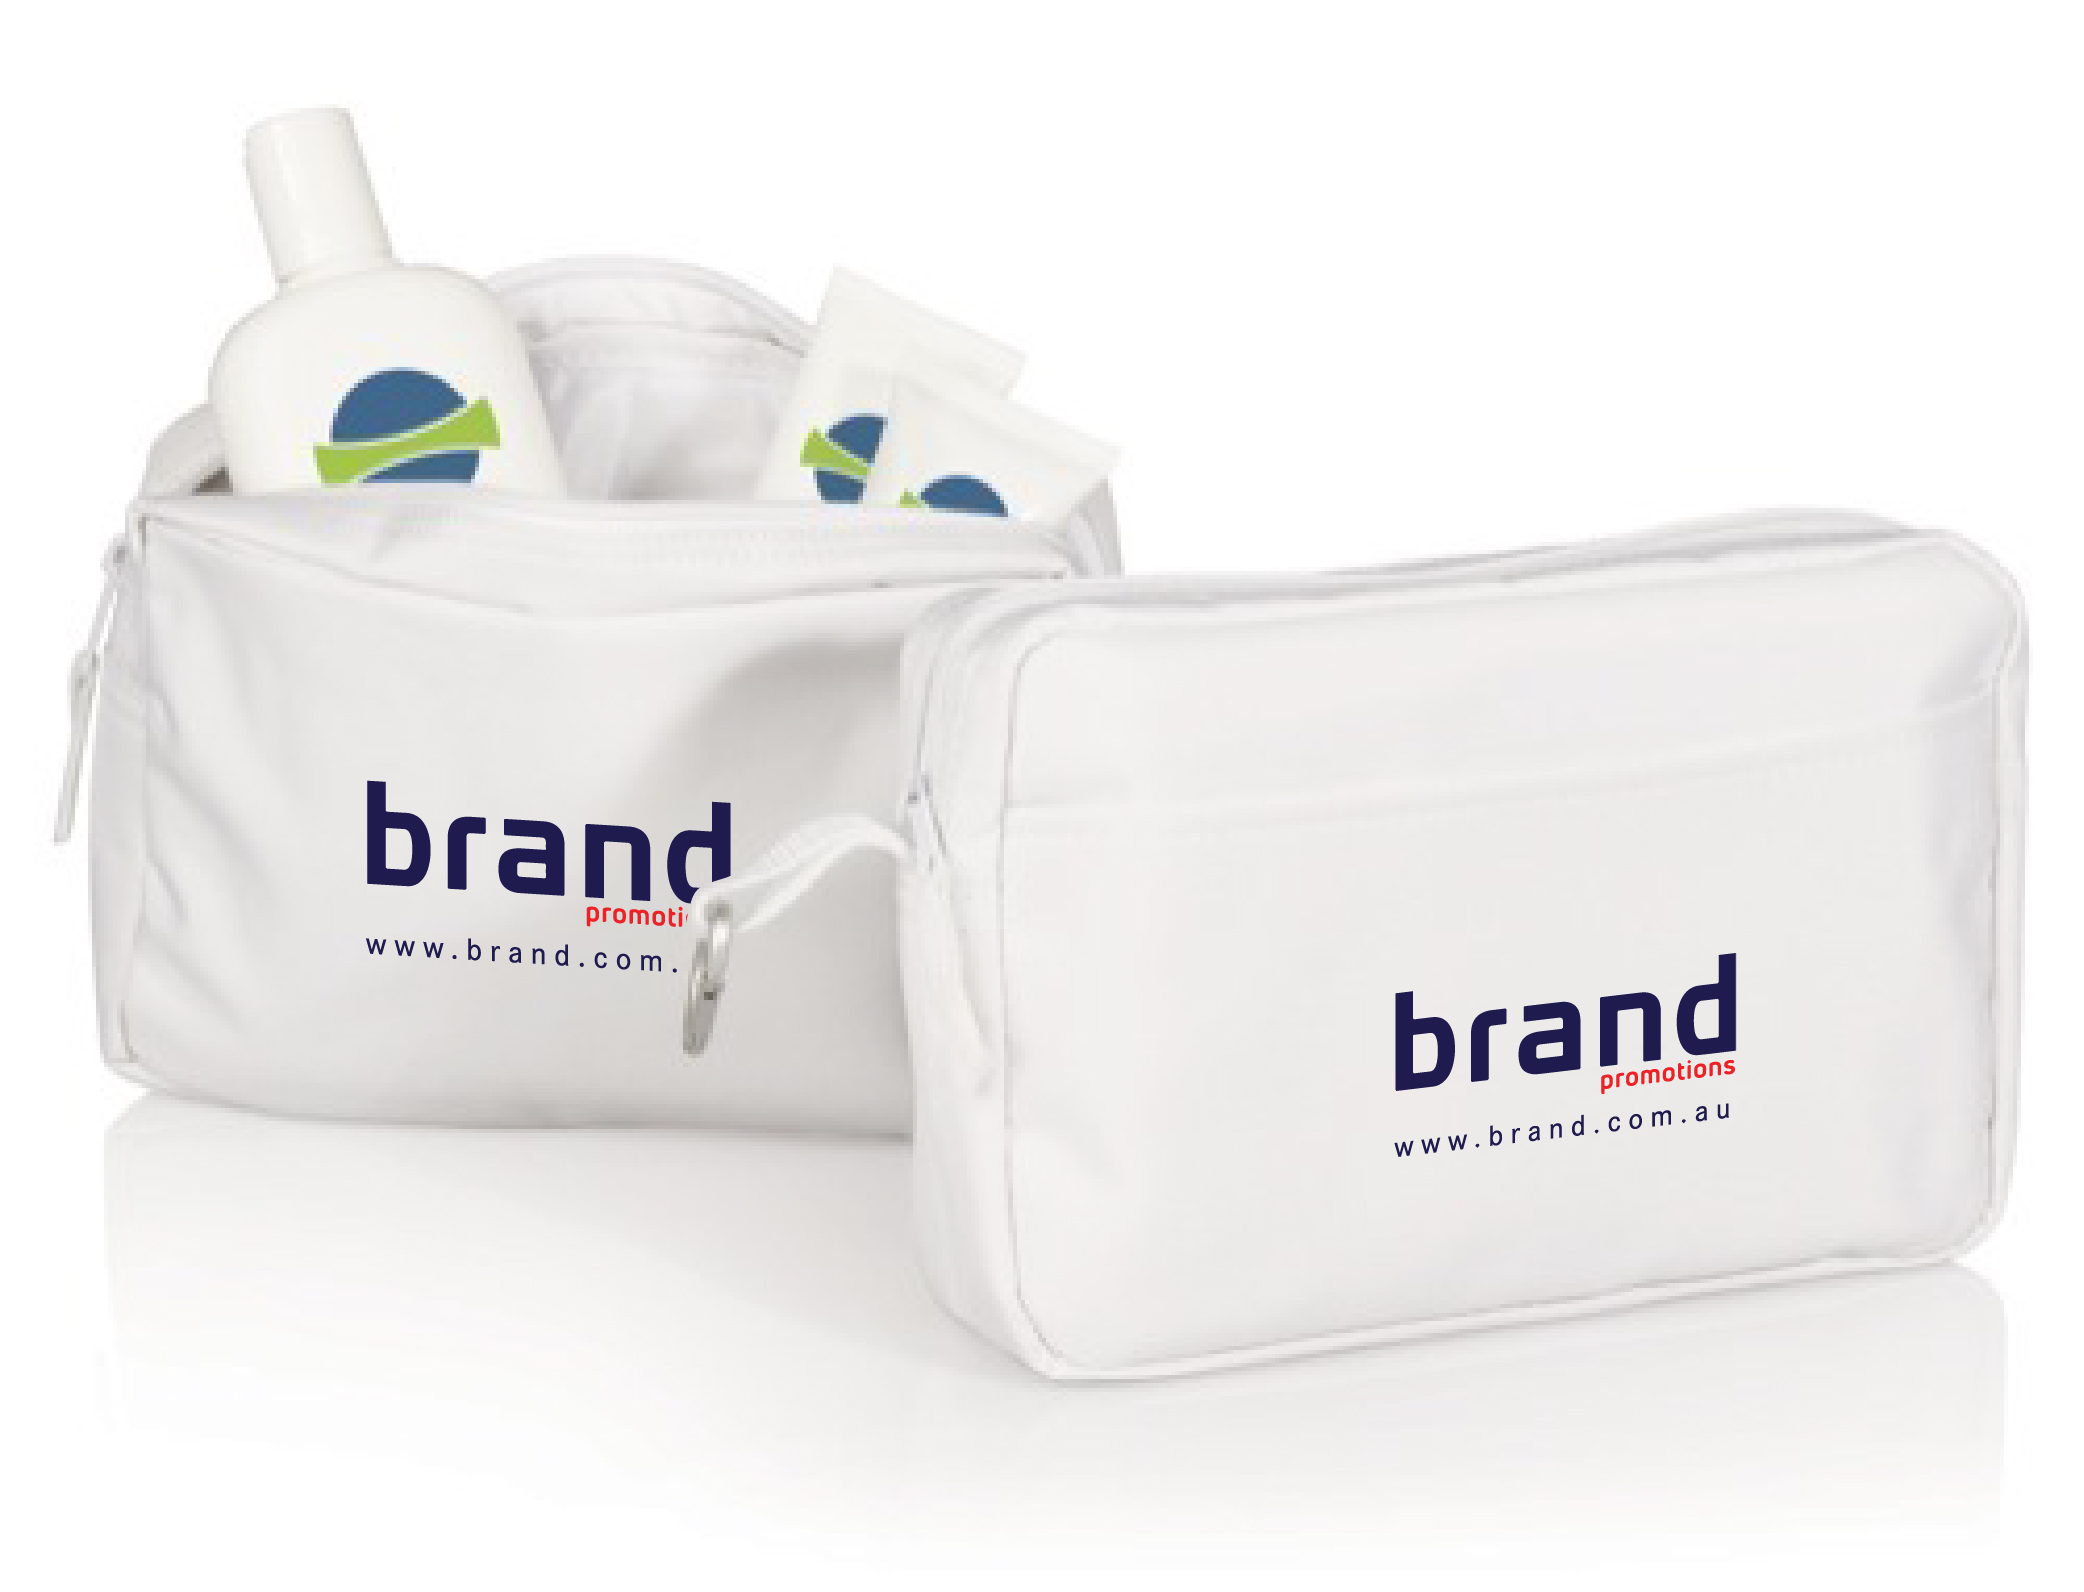 Promotional Cosmetic Bag